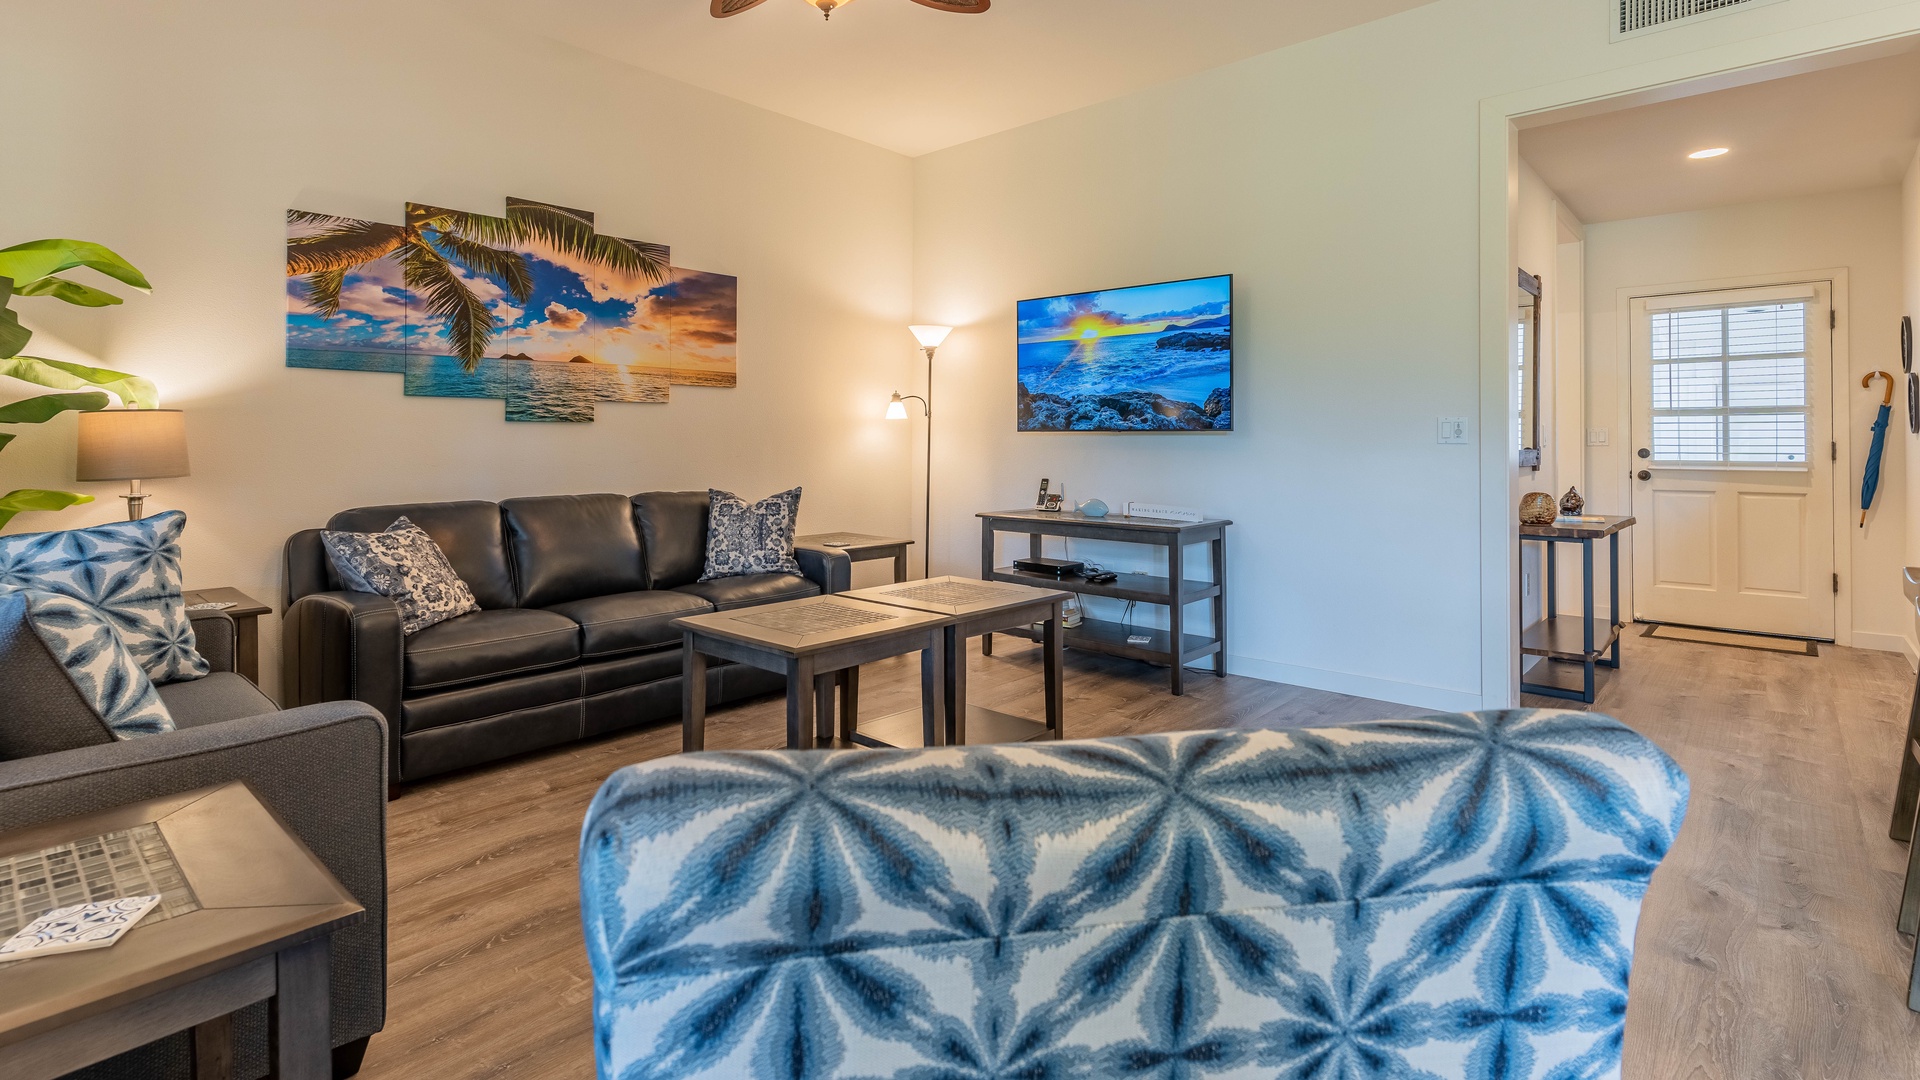 Kapolei Vacation Rentals, Coconut Plantation 1208-2 - The flat screen TV is all set up for a movie or your favorite show.